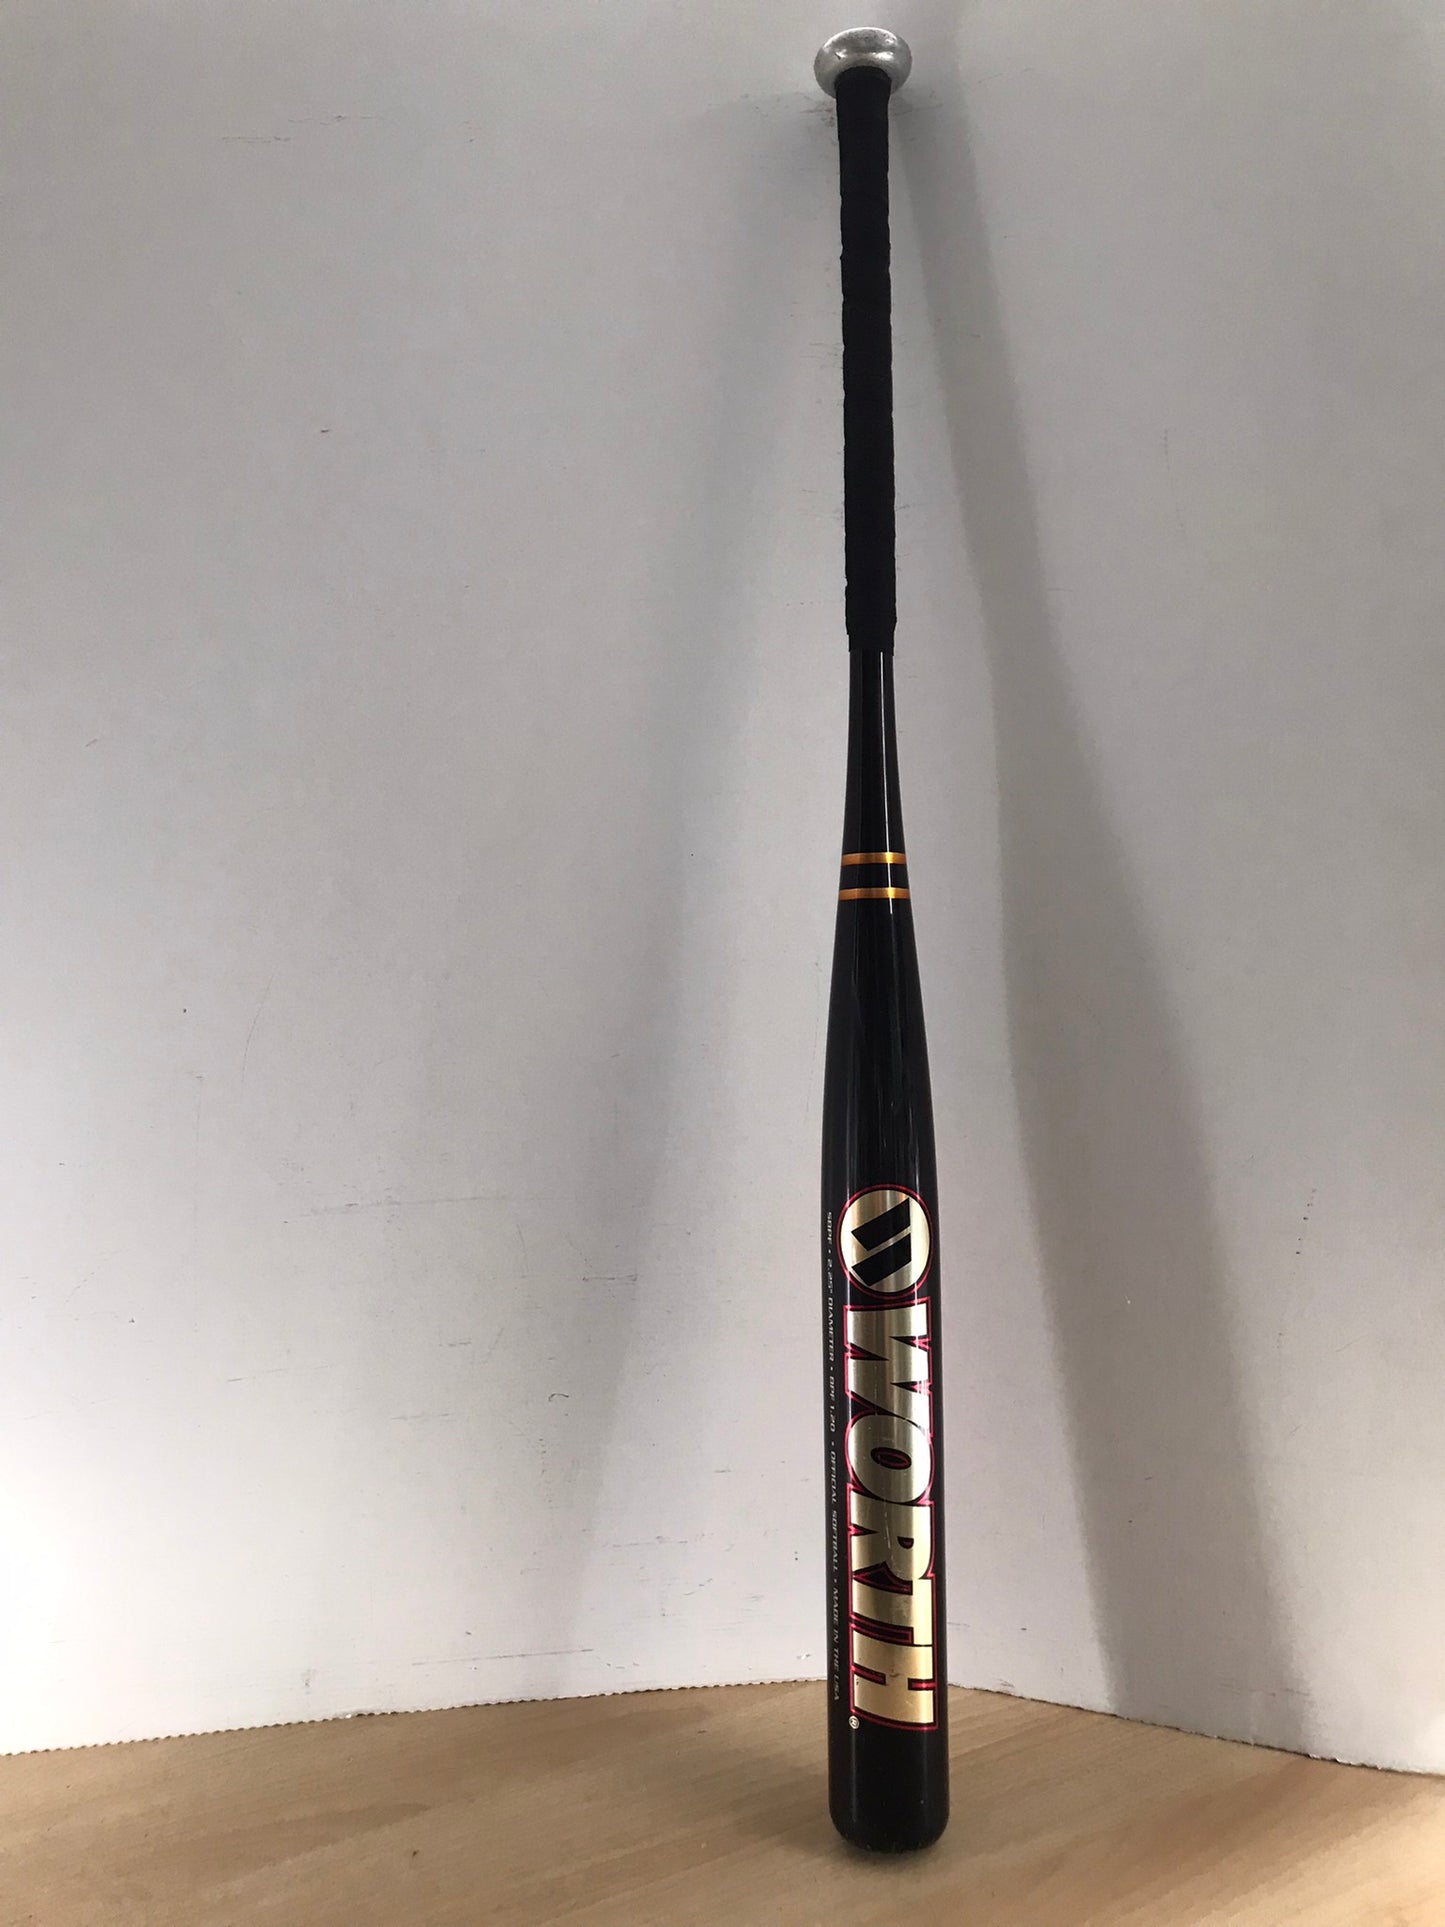 Baseball Bat 34 inch 28 oz Worth Special Edition Softball Gold Red Black Excellent